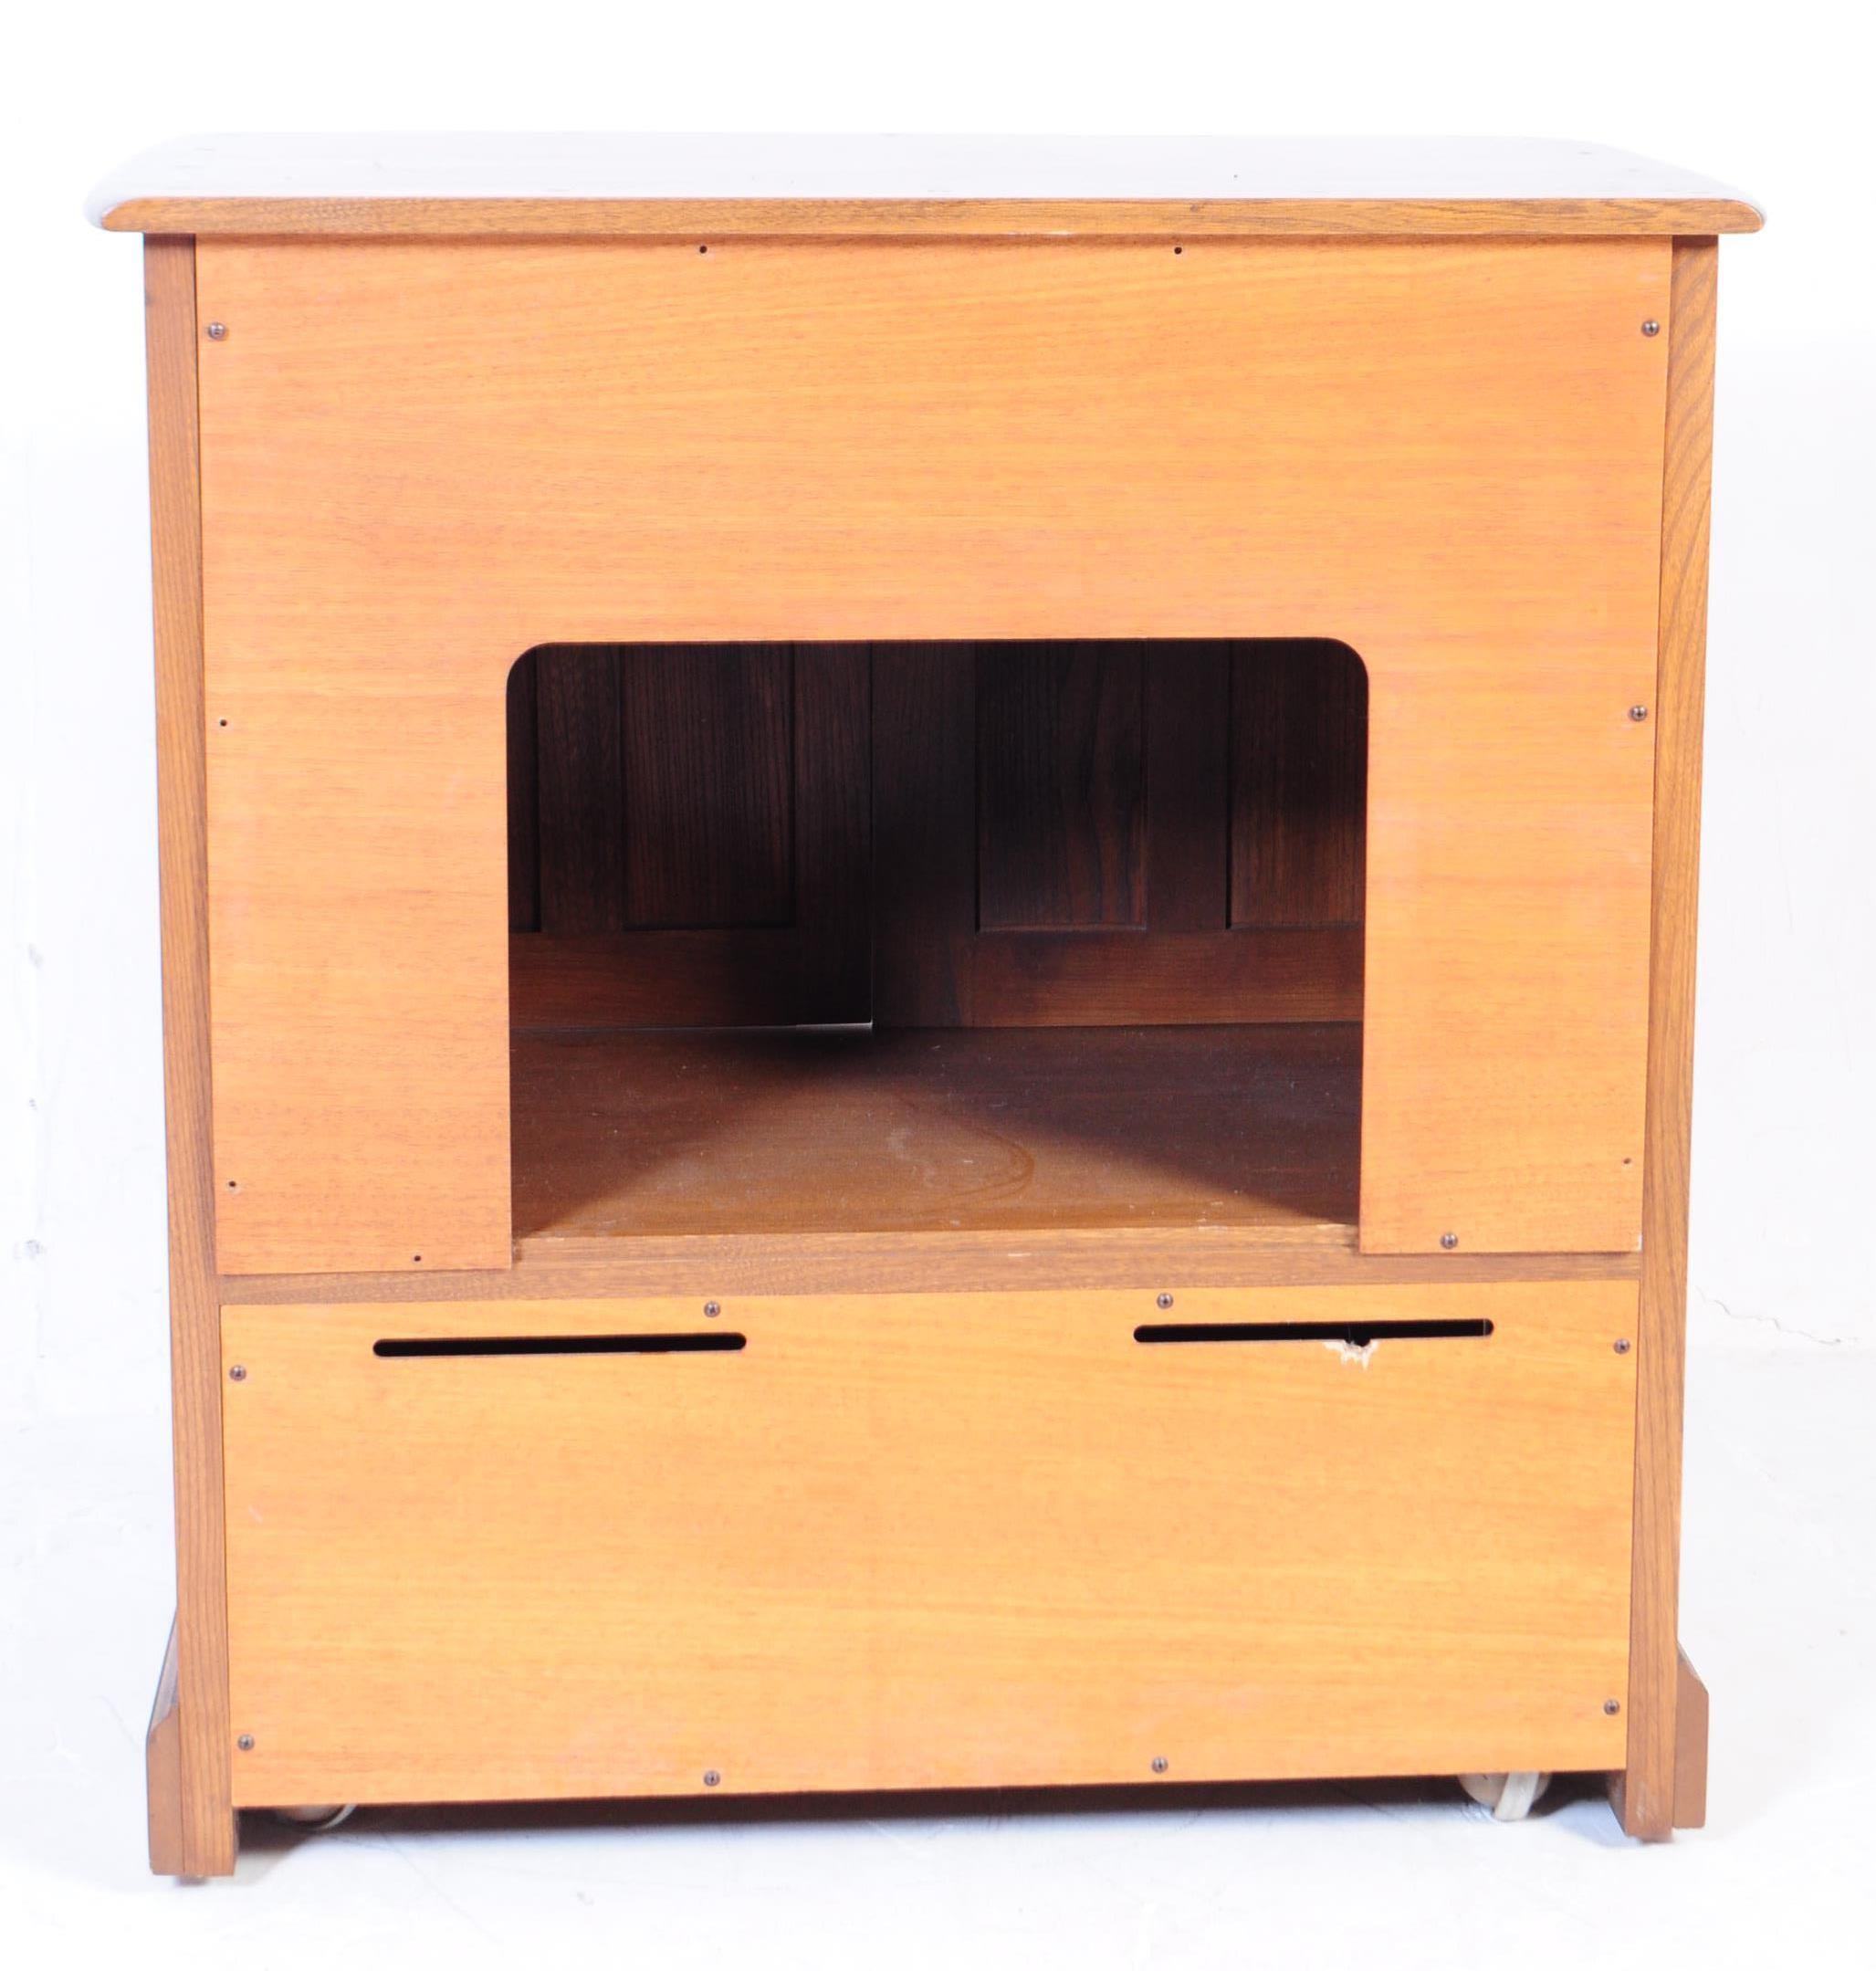 20TH CENTURY ERCOL GOLDEN DAWN ELM TV DRINKS CABINET - Image 6 of 6